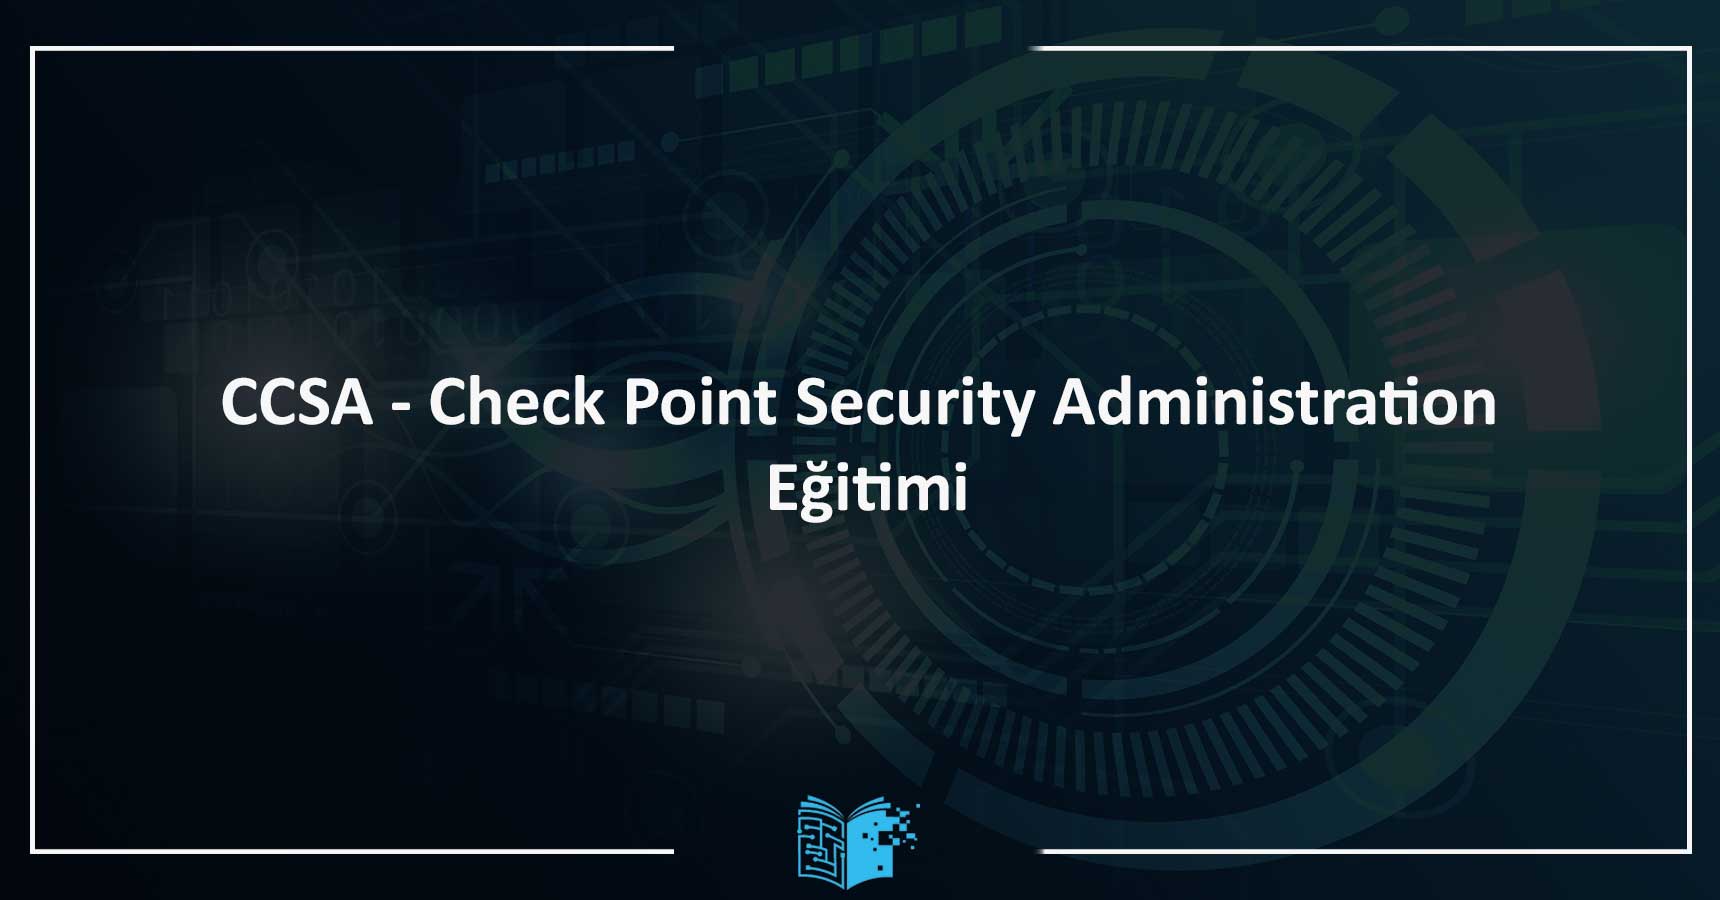 CCSA - Check Point Security Administration Eğitimi